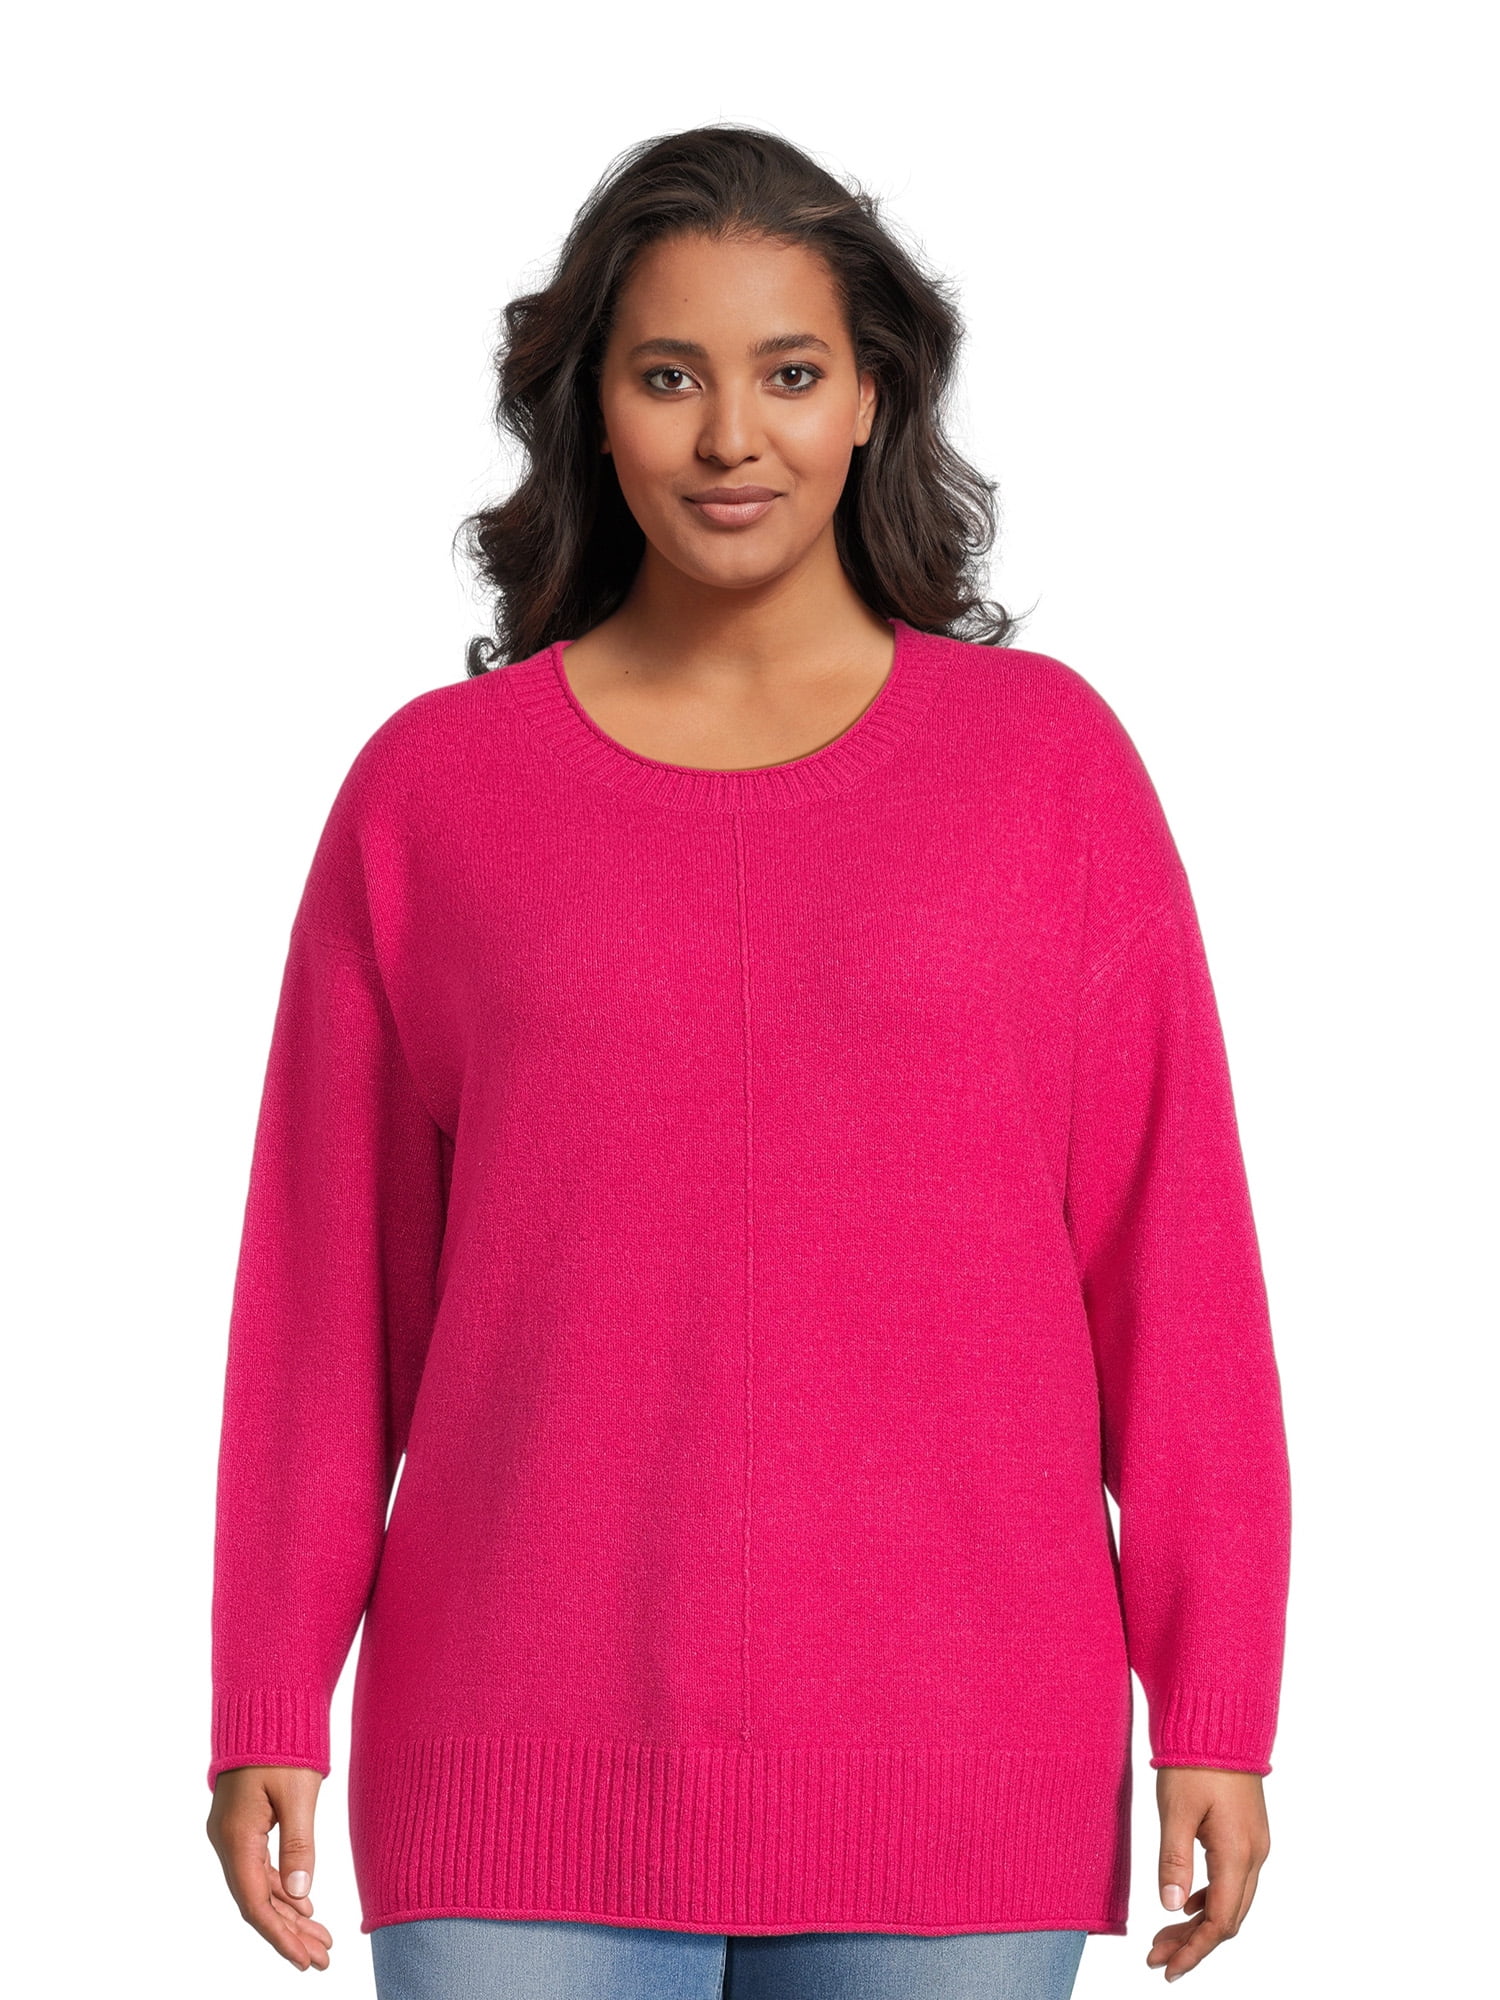 Terra & Sky Women's Plus Size Pullover Sweater with Center Seam ...